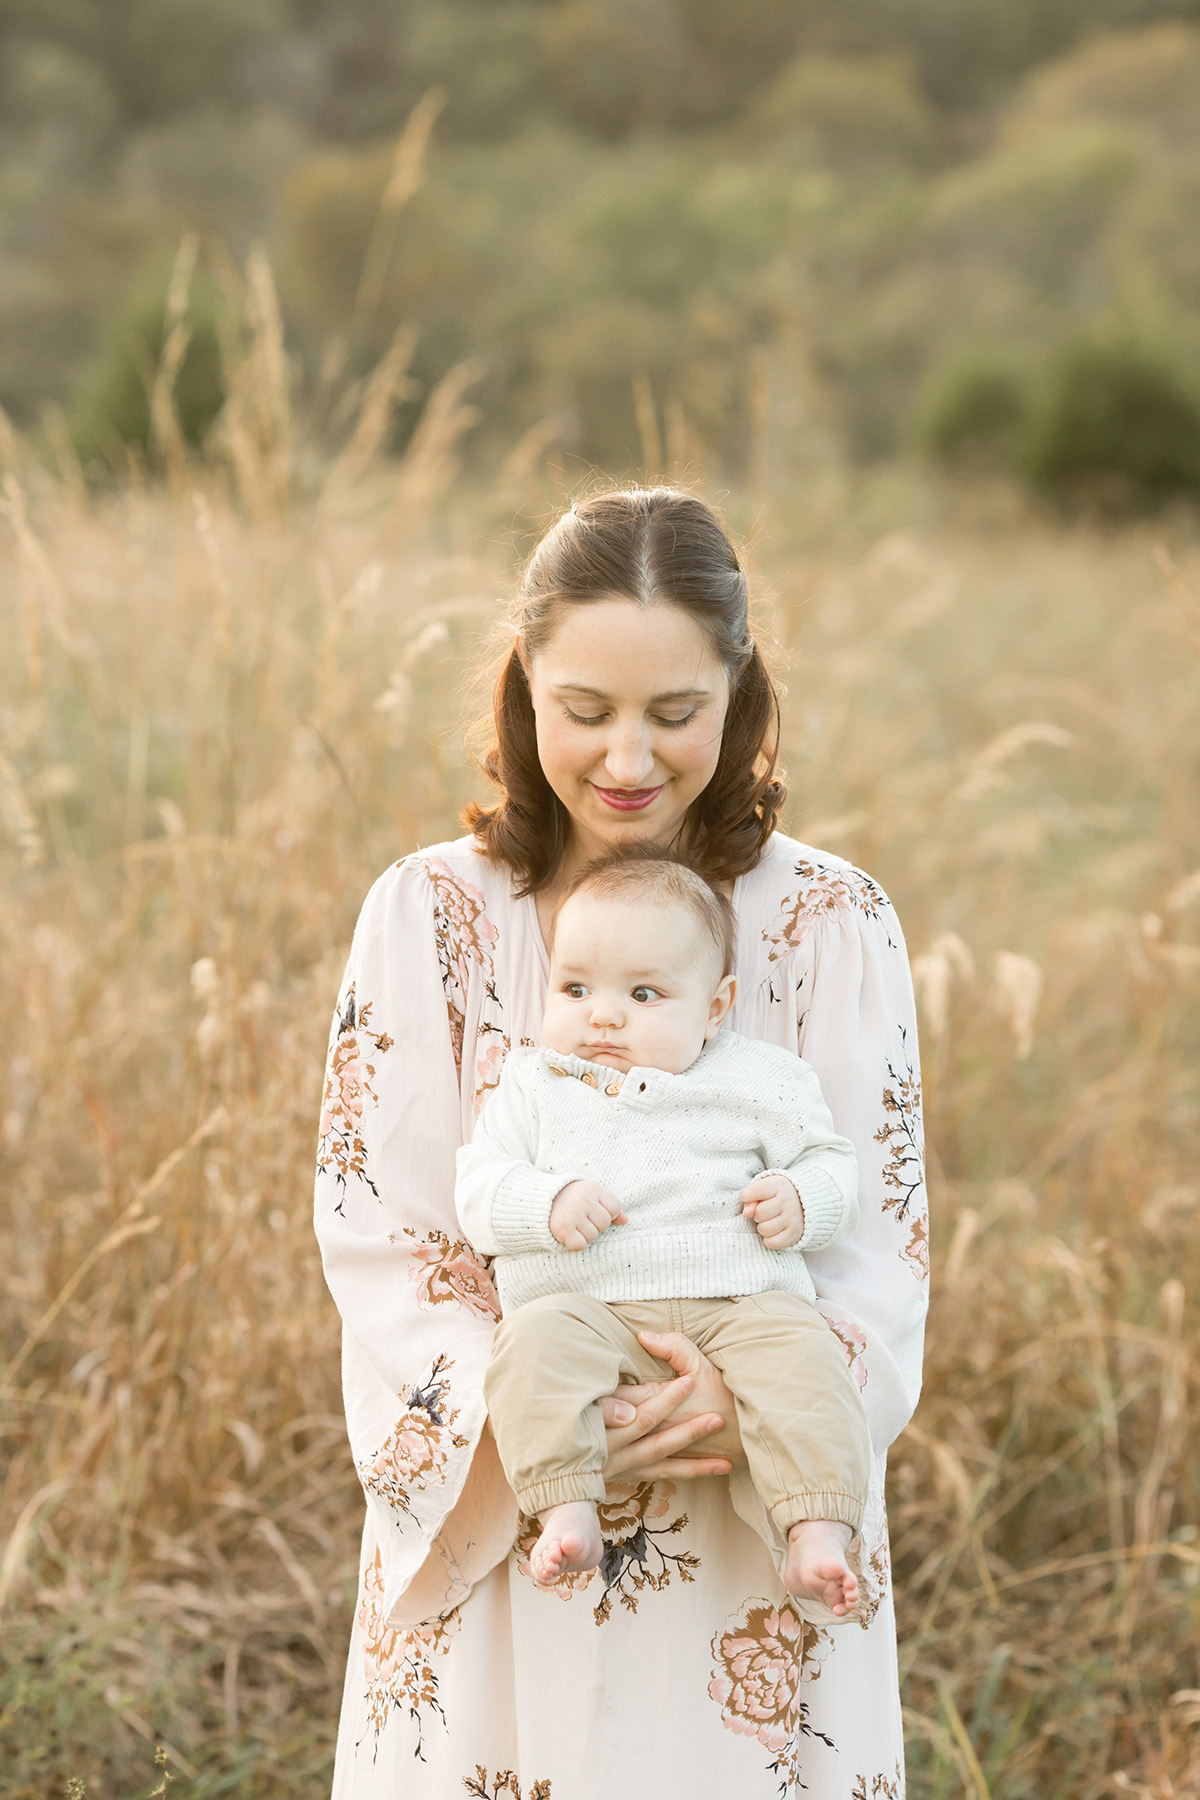 Louisville KY Family Photographer | Julie Brock Photography | Newborn | Maternity | Outdoor Family Photo Shoot in a Field with a baby.jpg